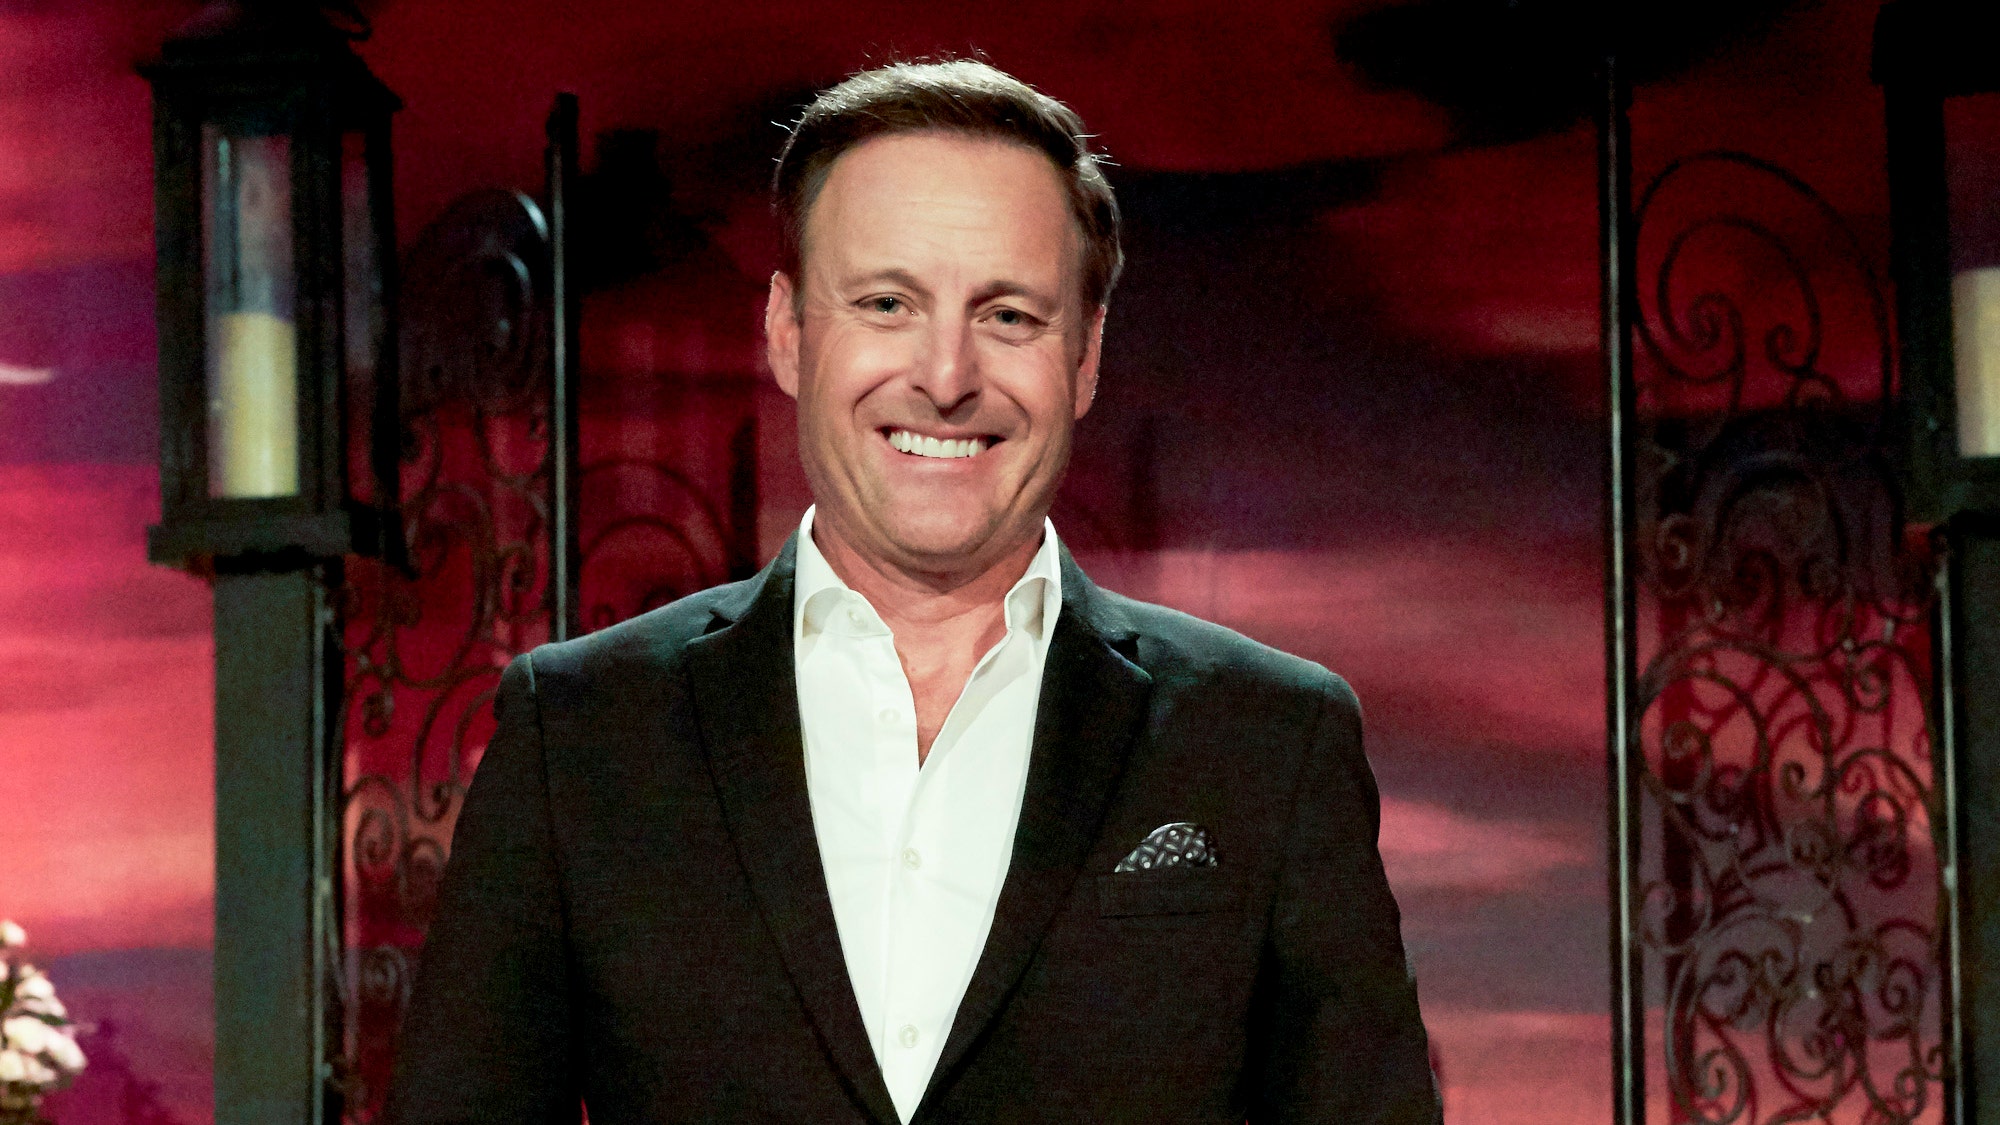 ‘Bachelor’: Who could be up for the hosting gig now that Chris Harrison is out?